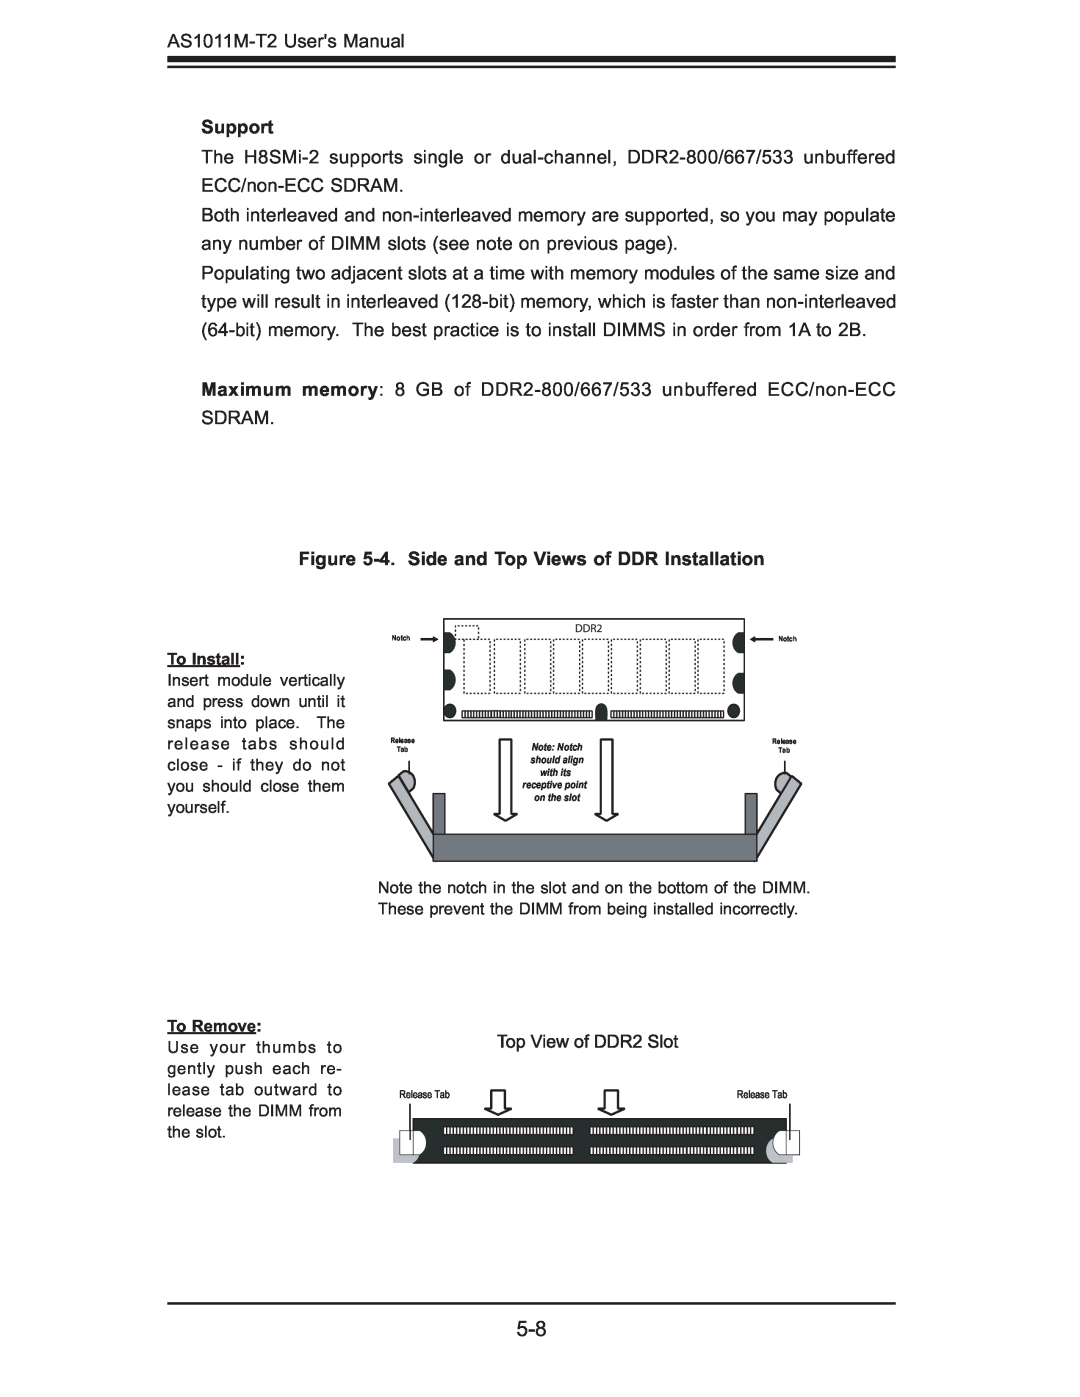 SUPER MICRO Computer AS1011M-T2 user manual Support, 4. Side and Top Views of DDR Installation, To Install, To Remove 